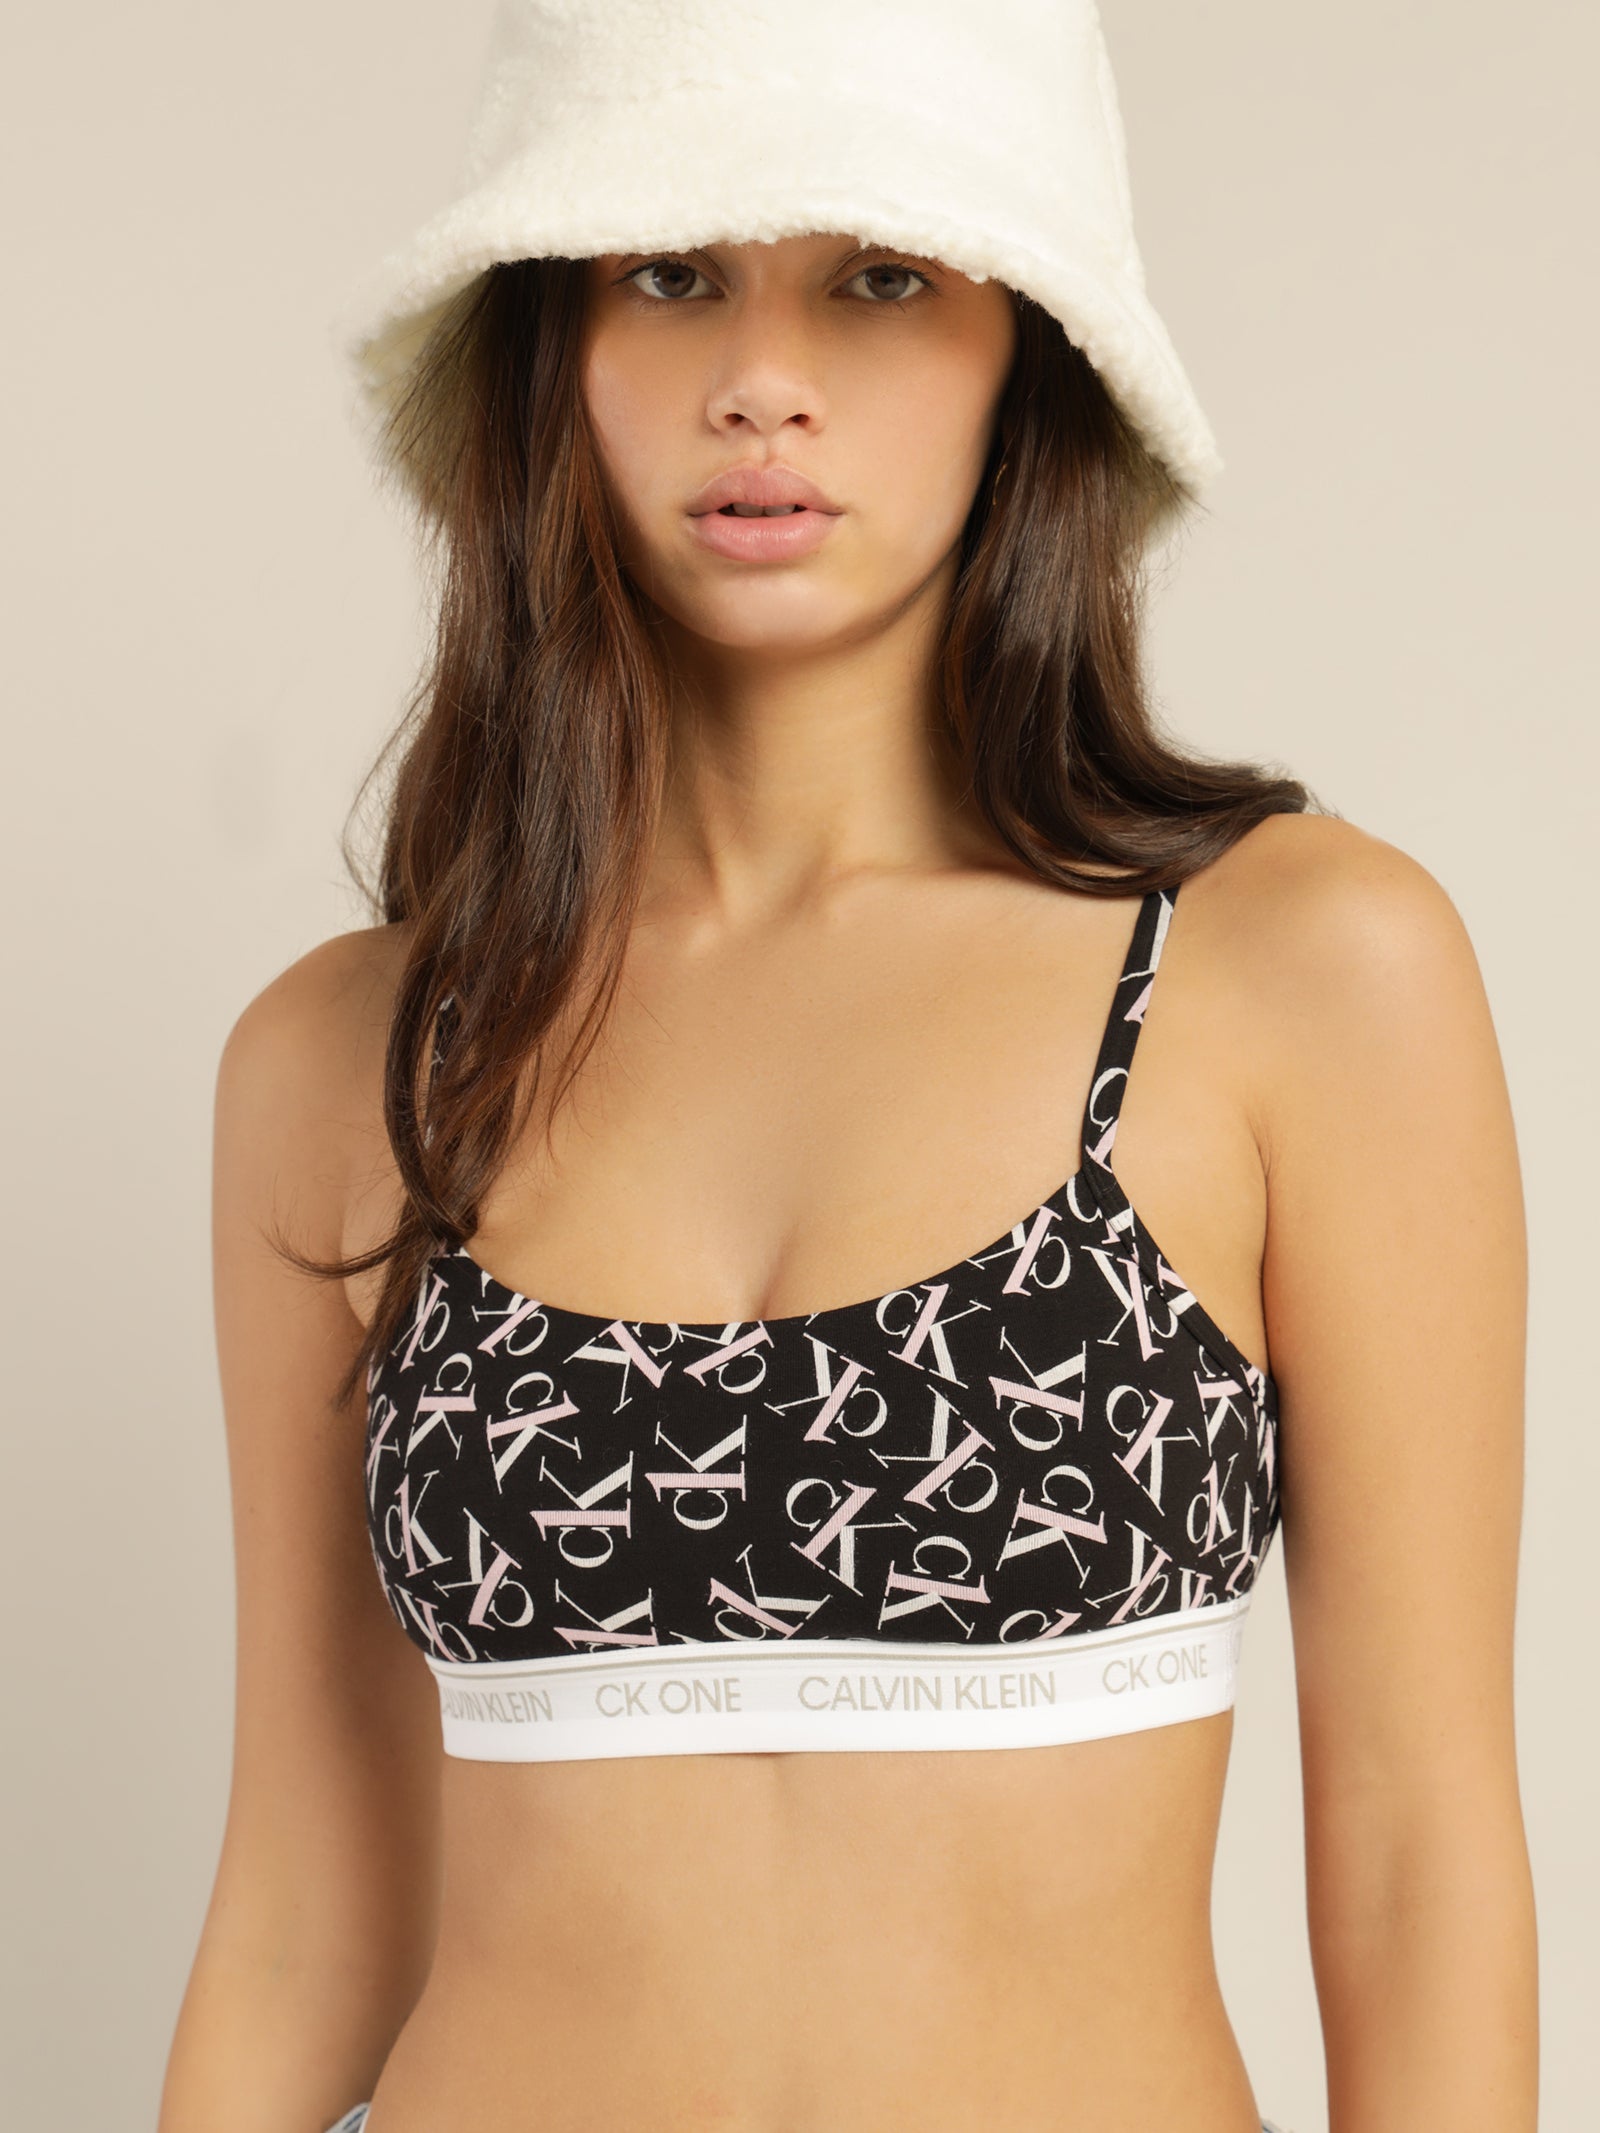 CK One Cotton Unlined Bralette in Black, White & Sand Rose - Glue